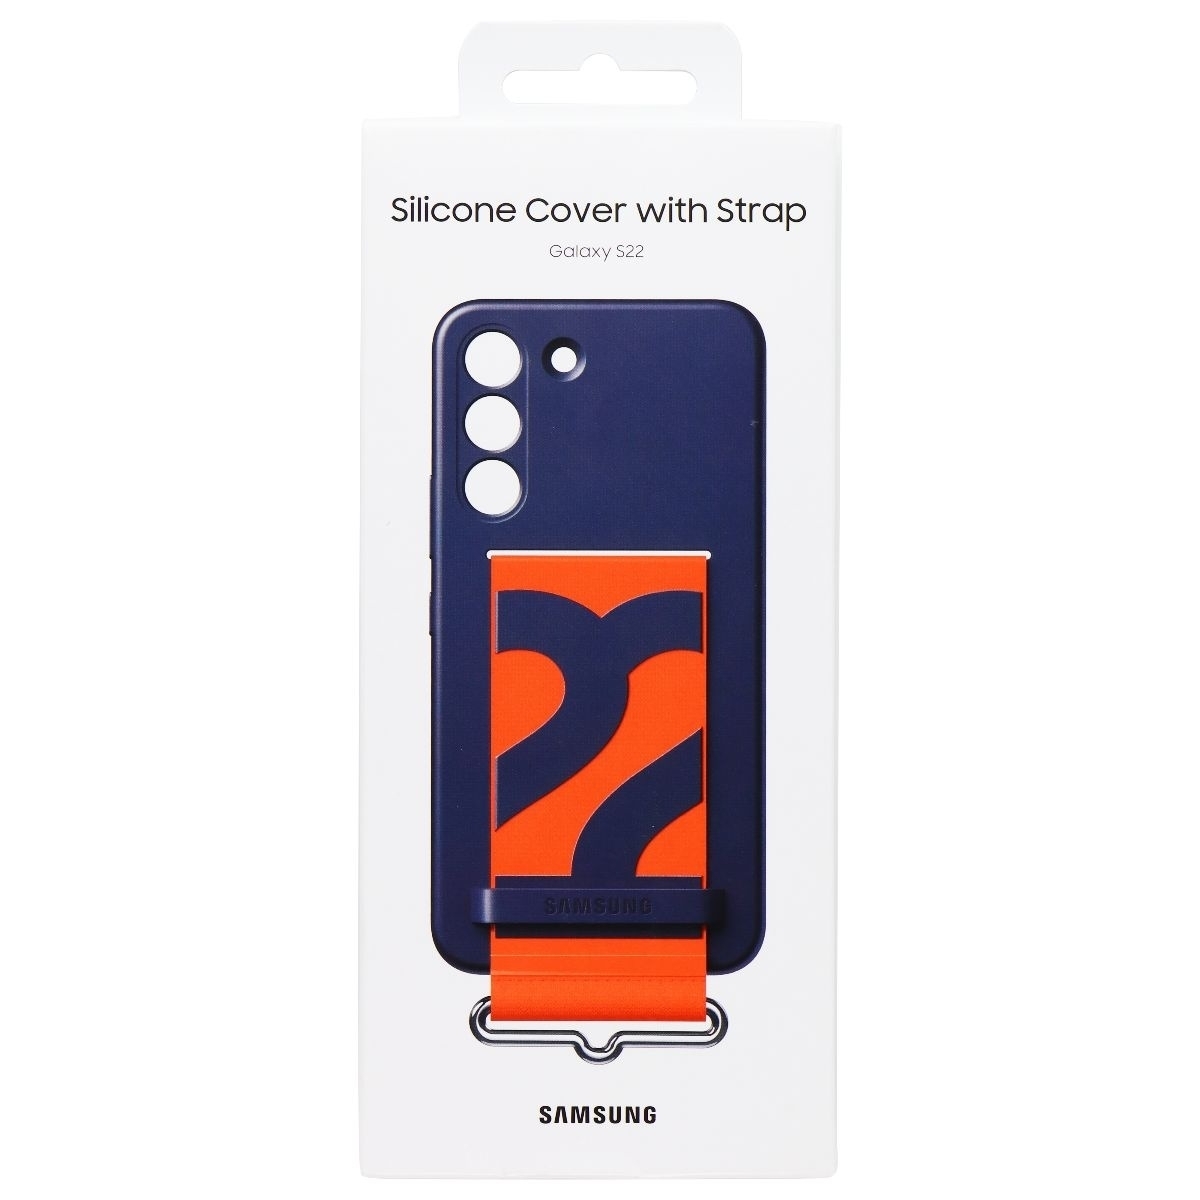 Samsung Silicone Cover With Strap For Samsung Galaxy S22 - Navy/Orange